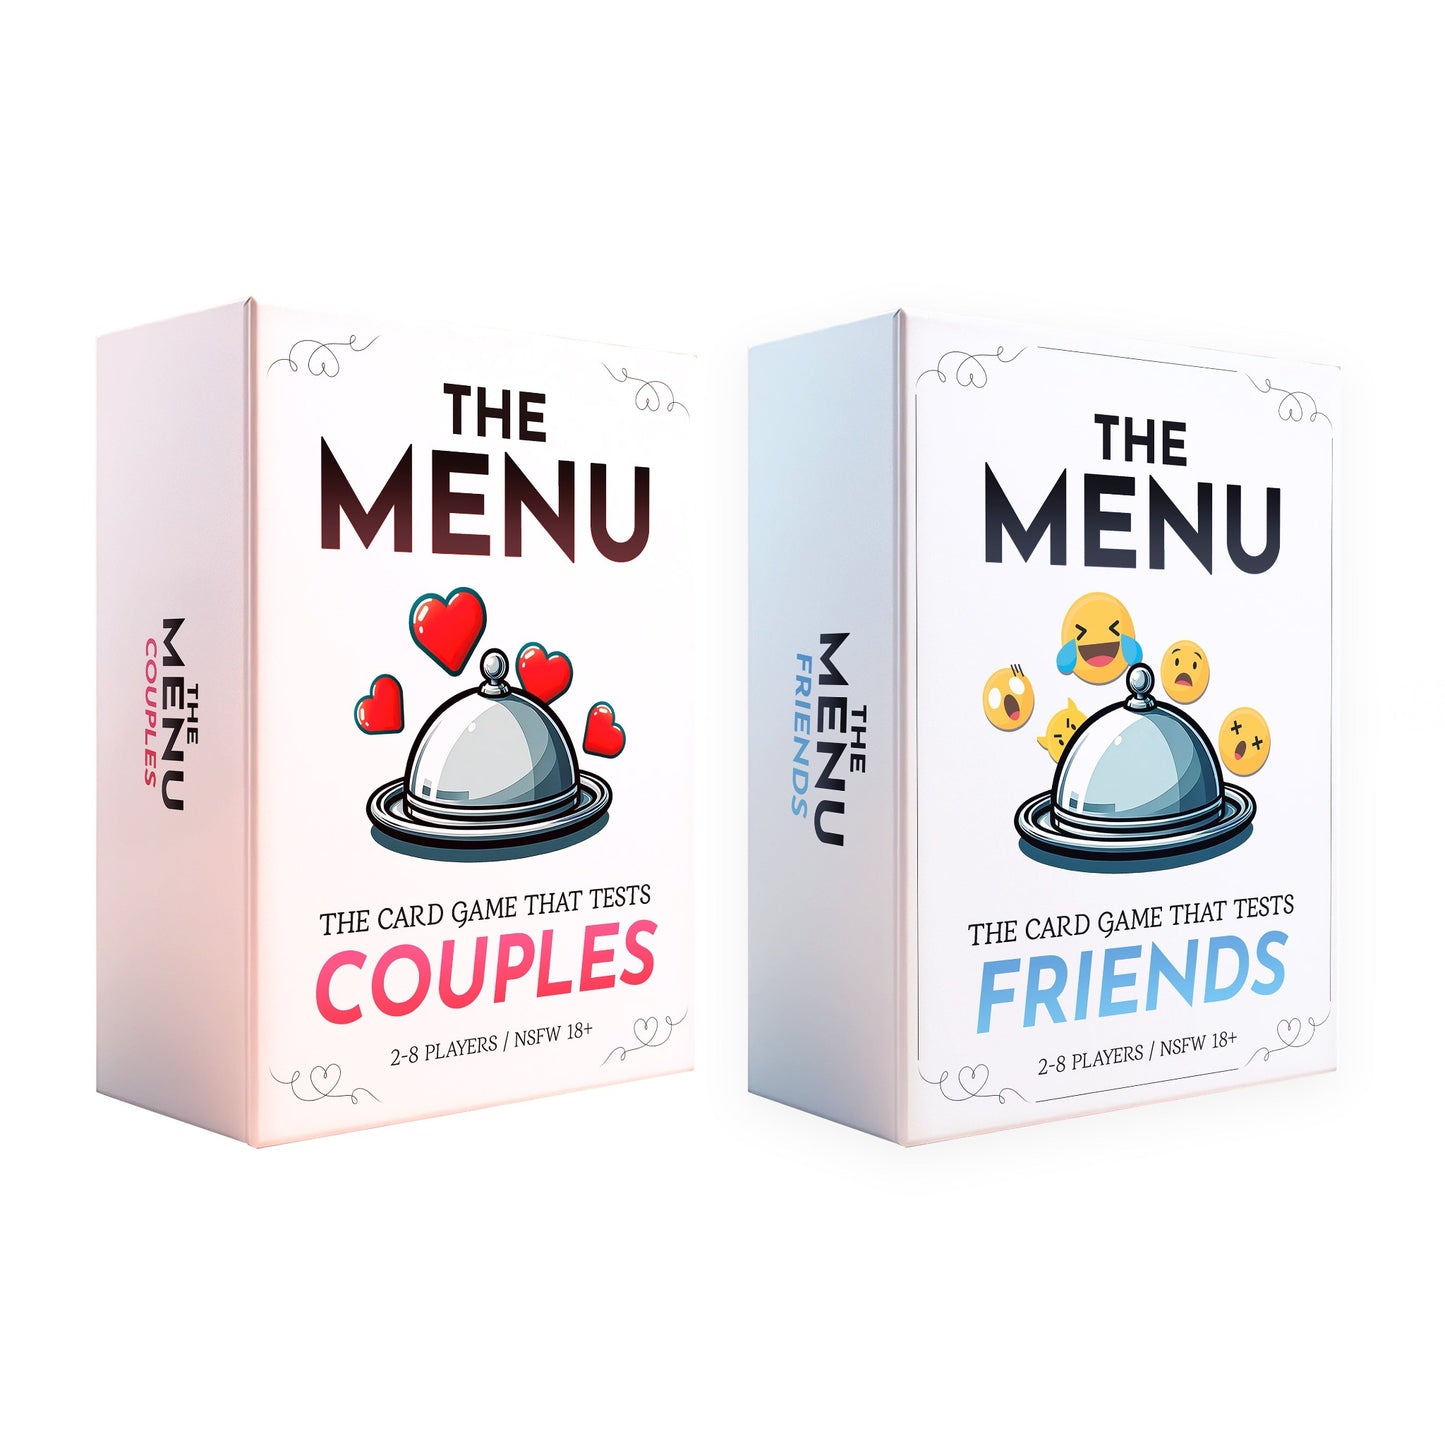 The Friendship and Relationship Test Bundle - The Menu Card Game